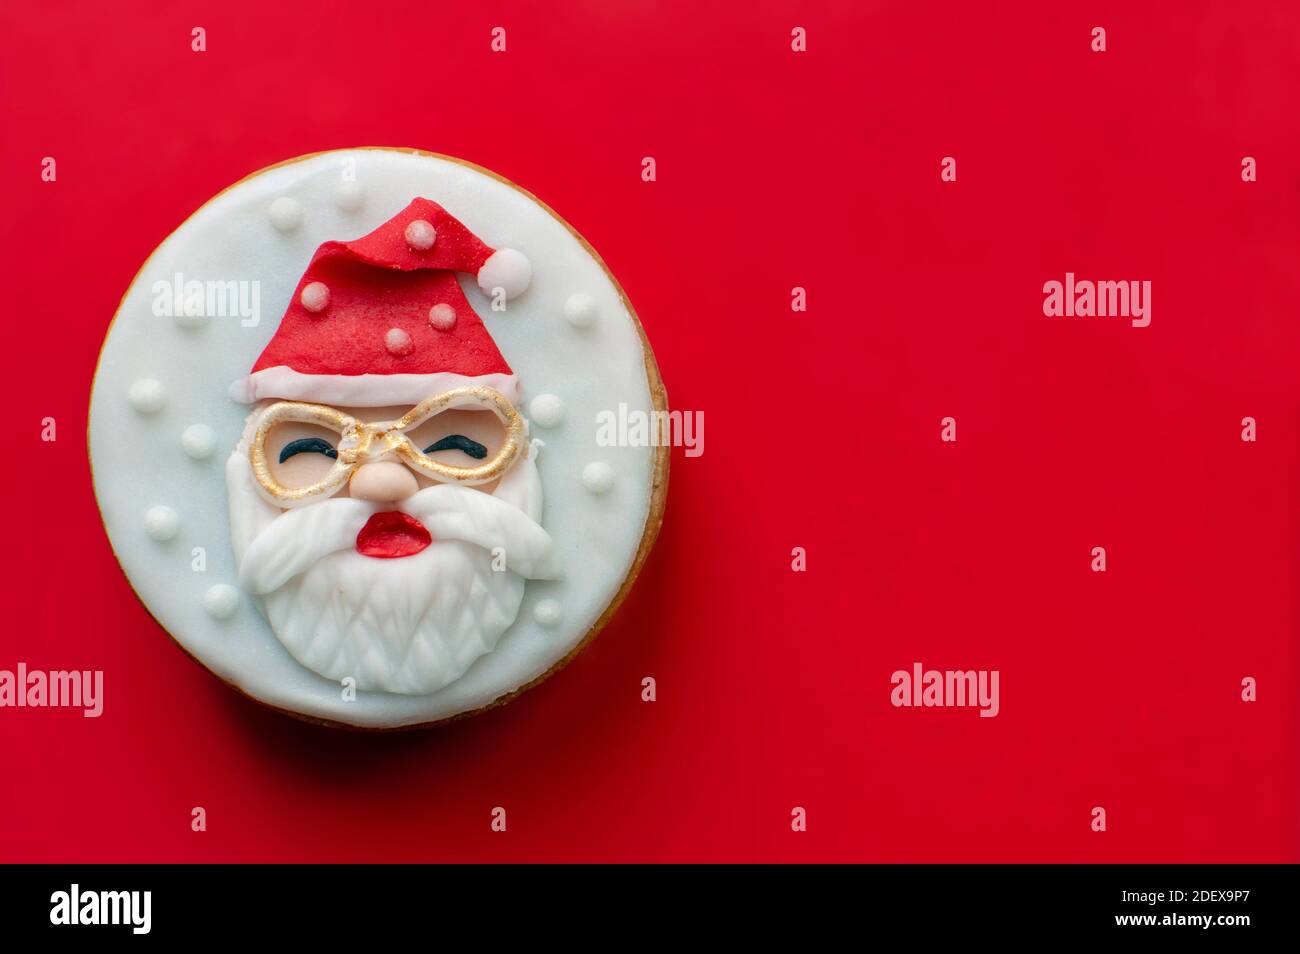 Santa Claus Christmas cookie on red background Stock Photo